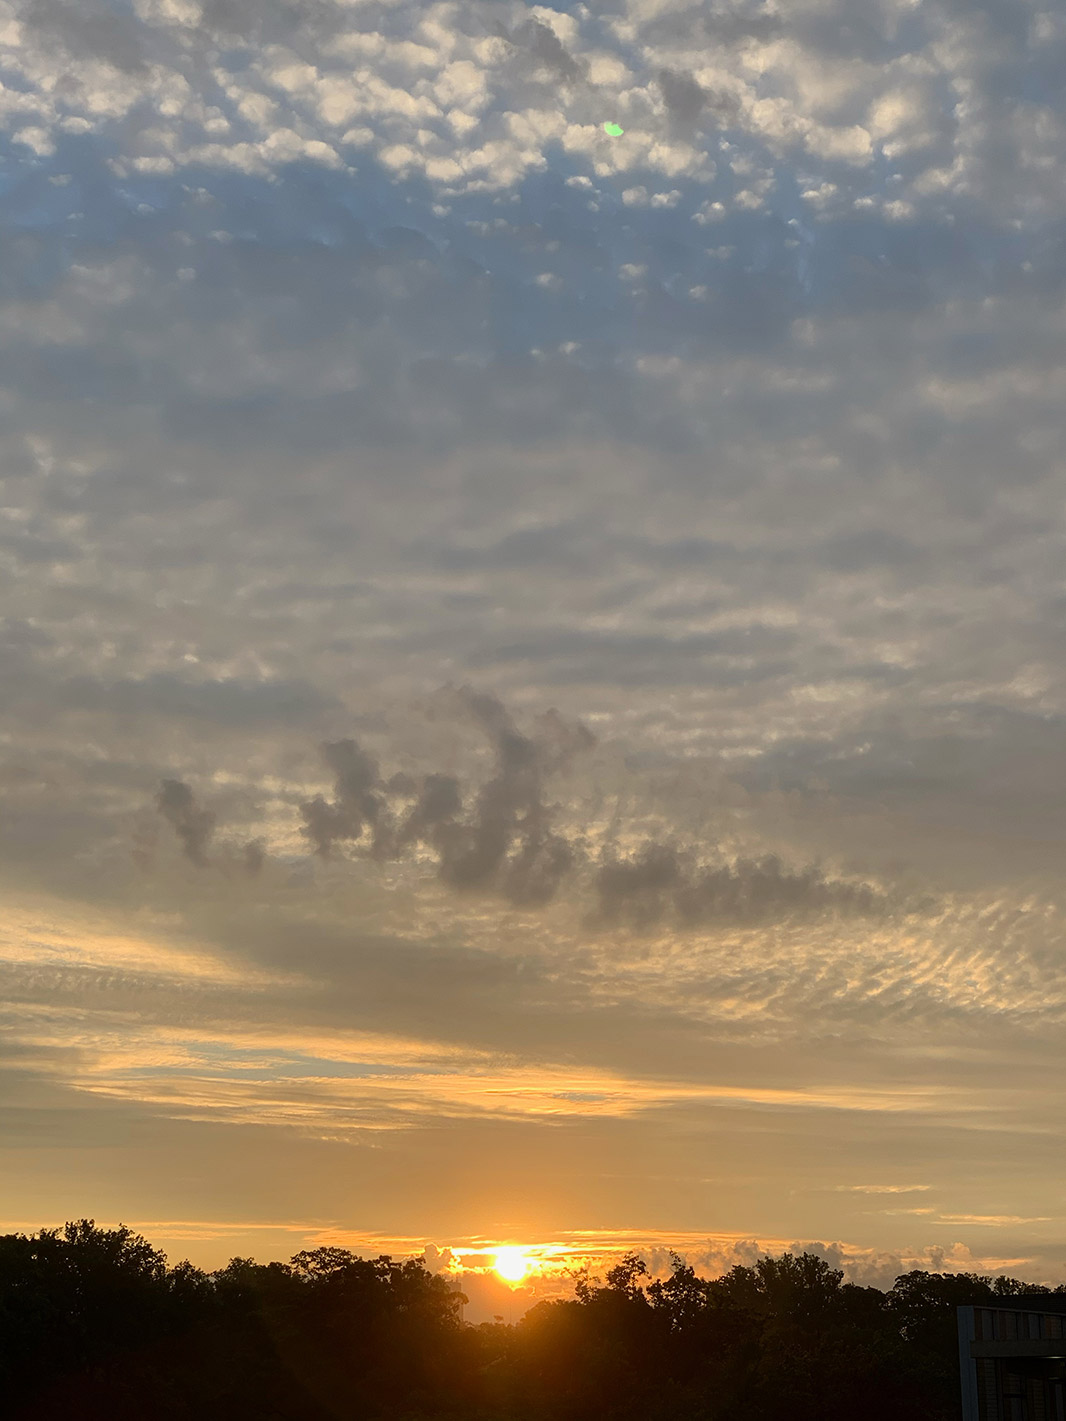 Partial Solar Eclipse viewing conditions - between the clouds at sunrise in Towson, MD! Thursday, June 10, 2021 - photo by Linda Schenk